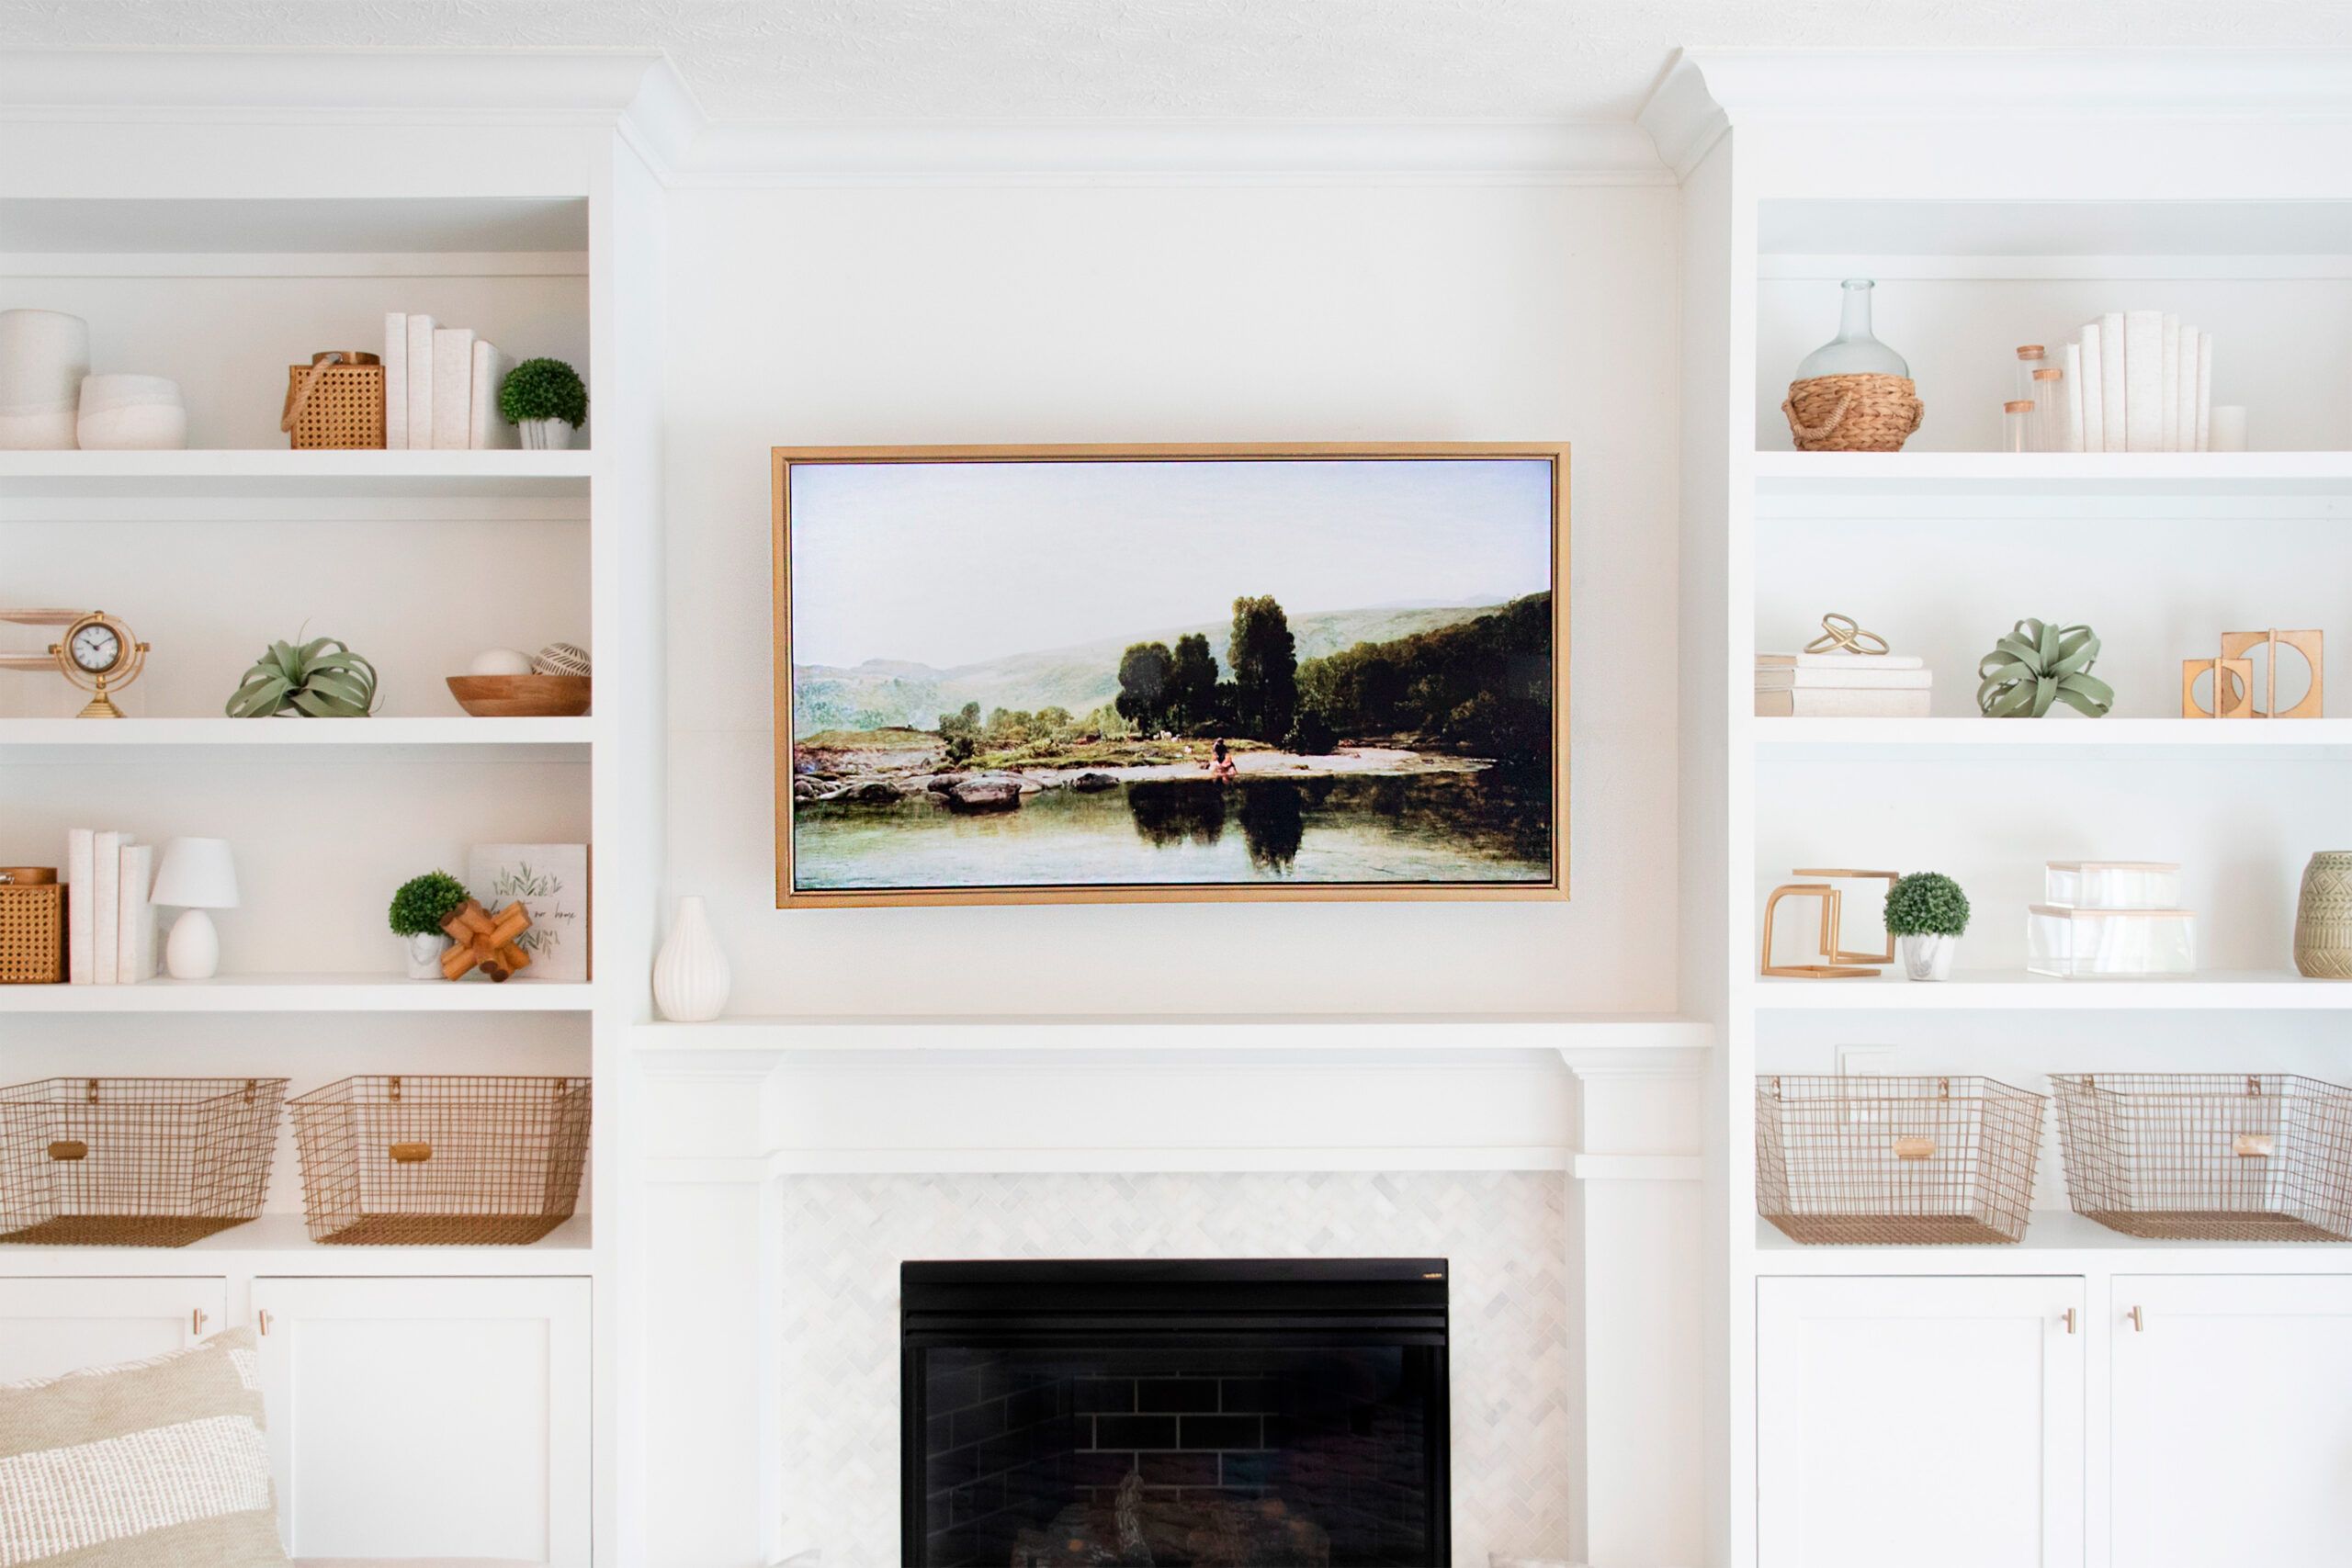 Neutral colored entertainment center with a frame around a TV to make it look like artwork.